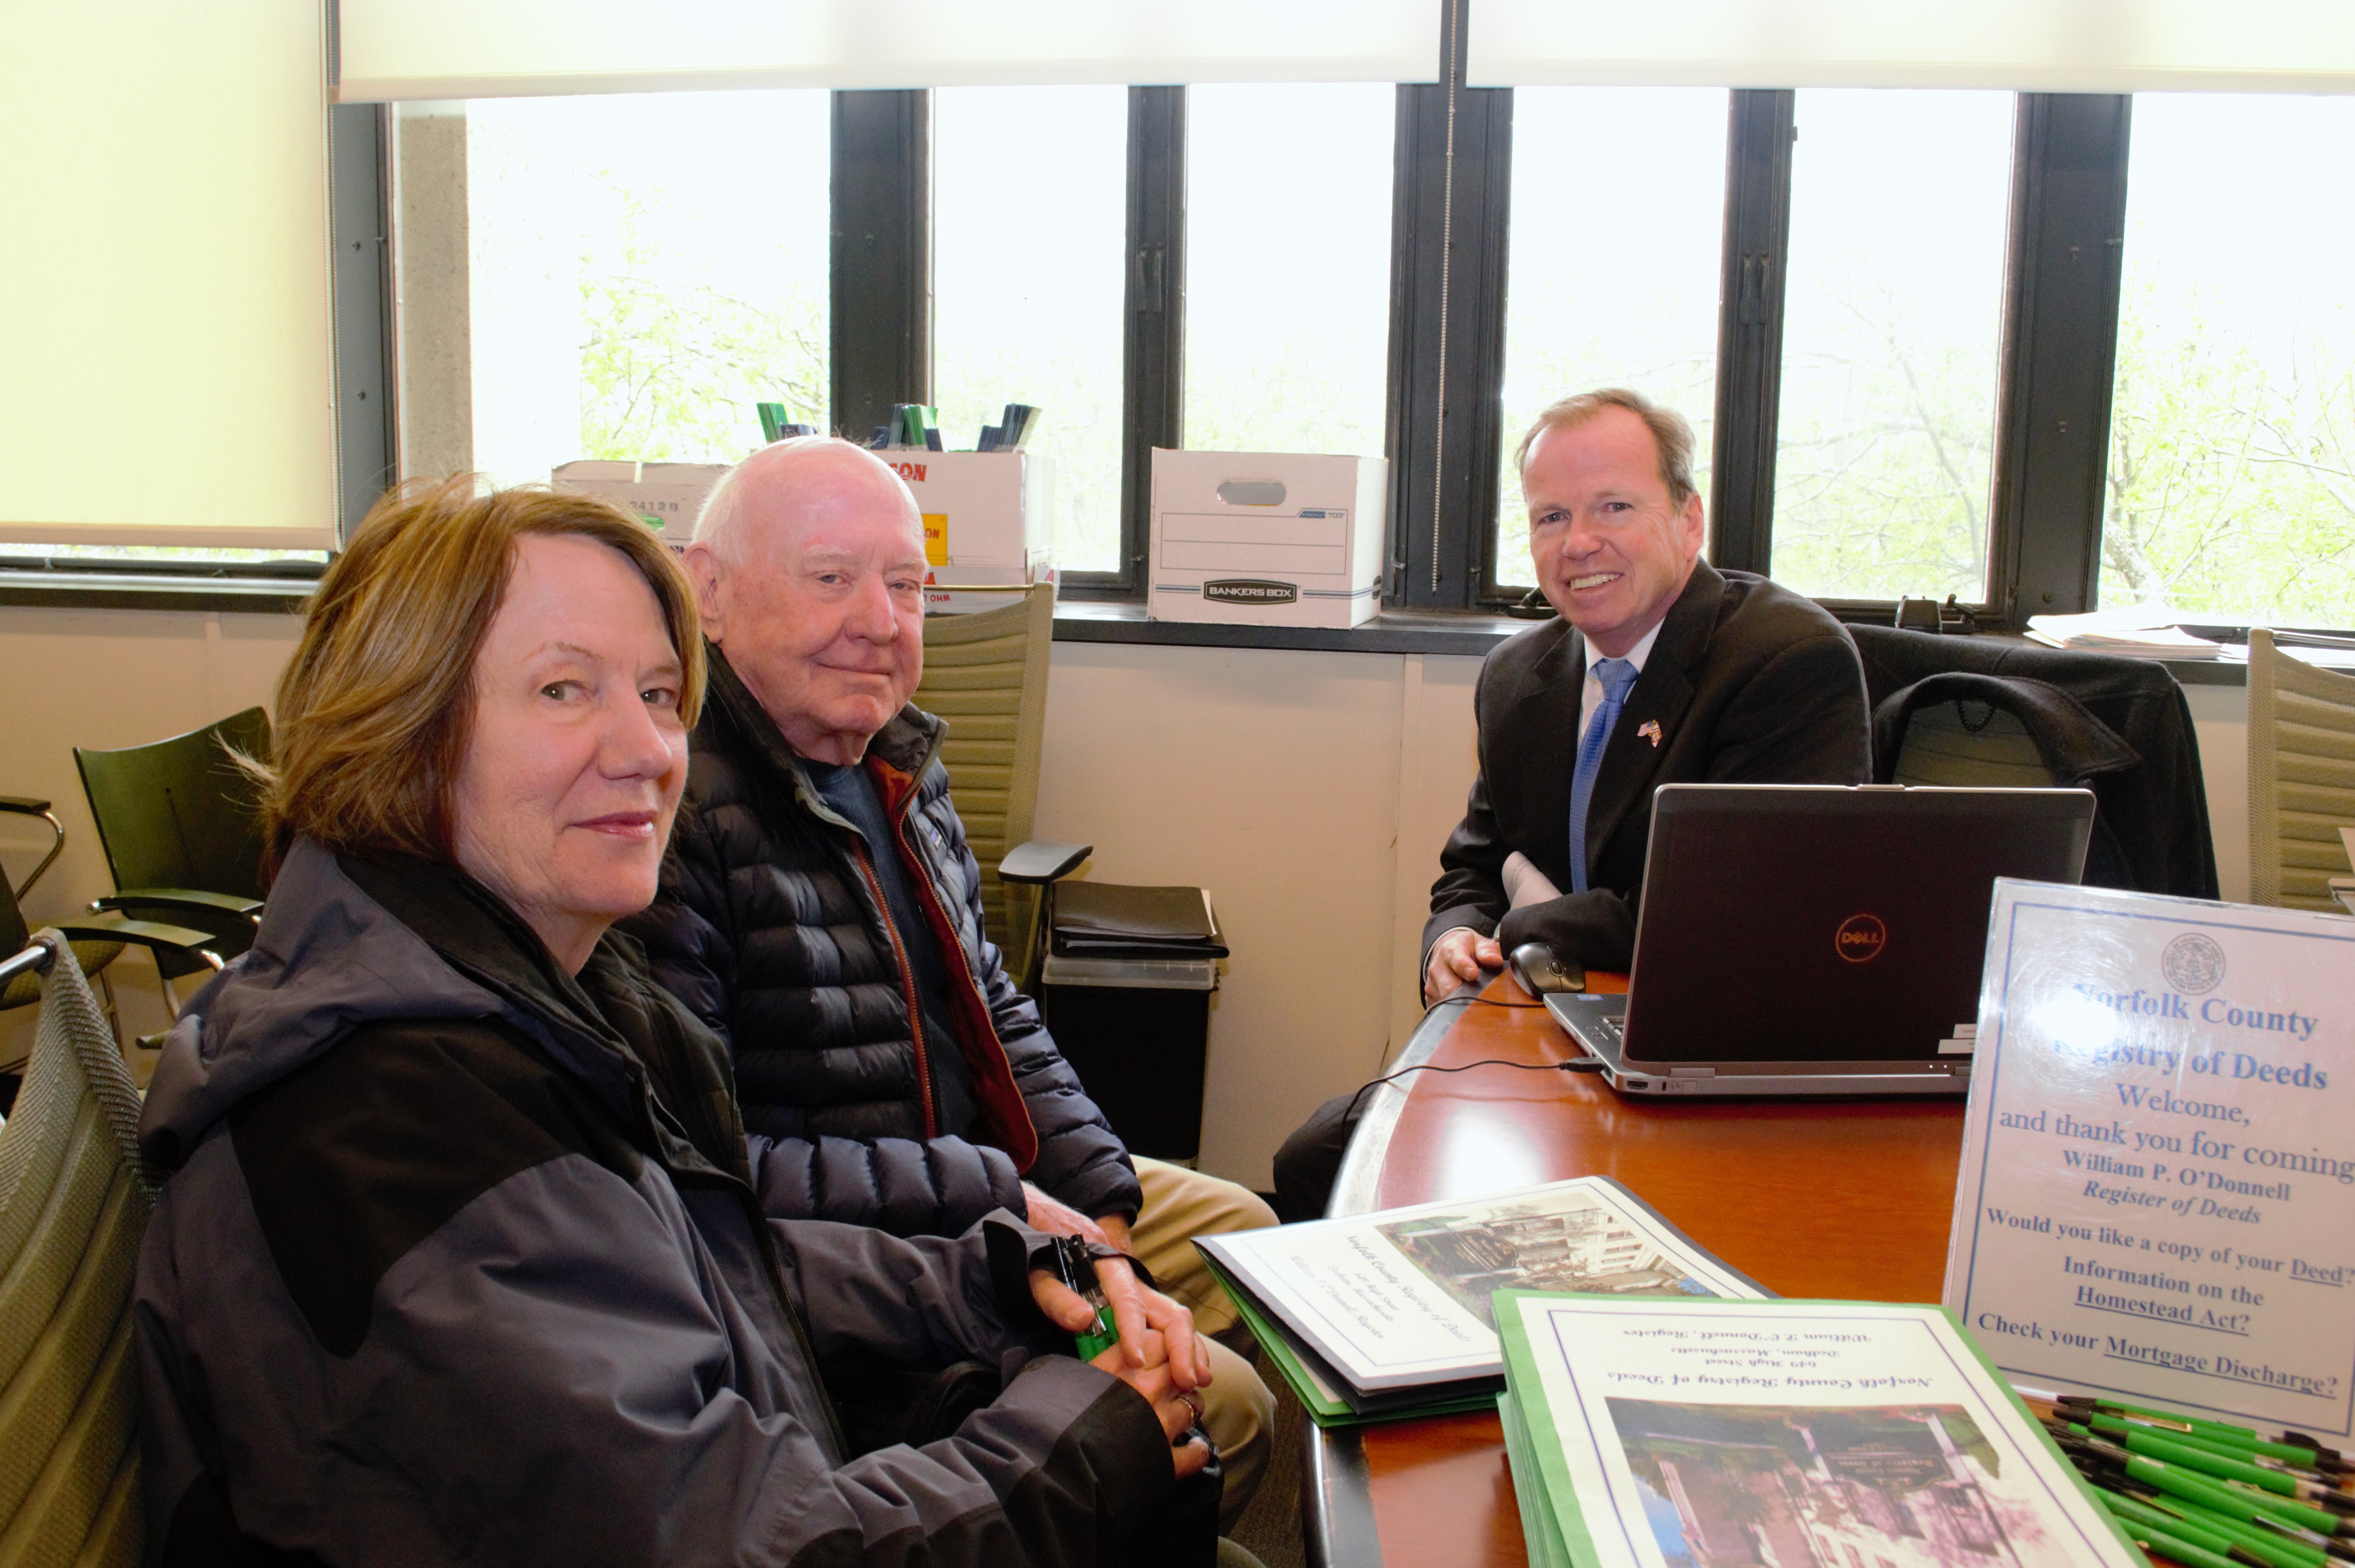 (From right) Norfolk County Register of Deeds William P. O’Donnell, Gerard and Margaret Lloyd pose for a photo during the Registry of Deeds office hours at Milton Town Hall.